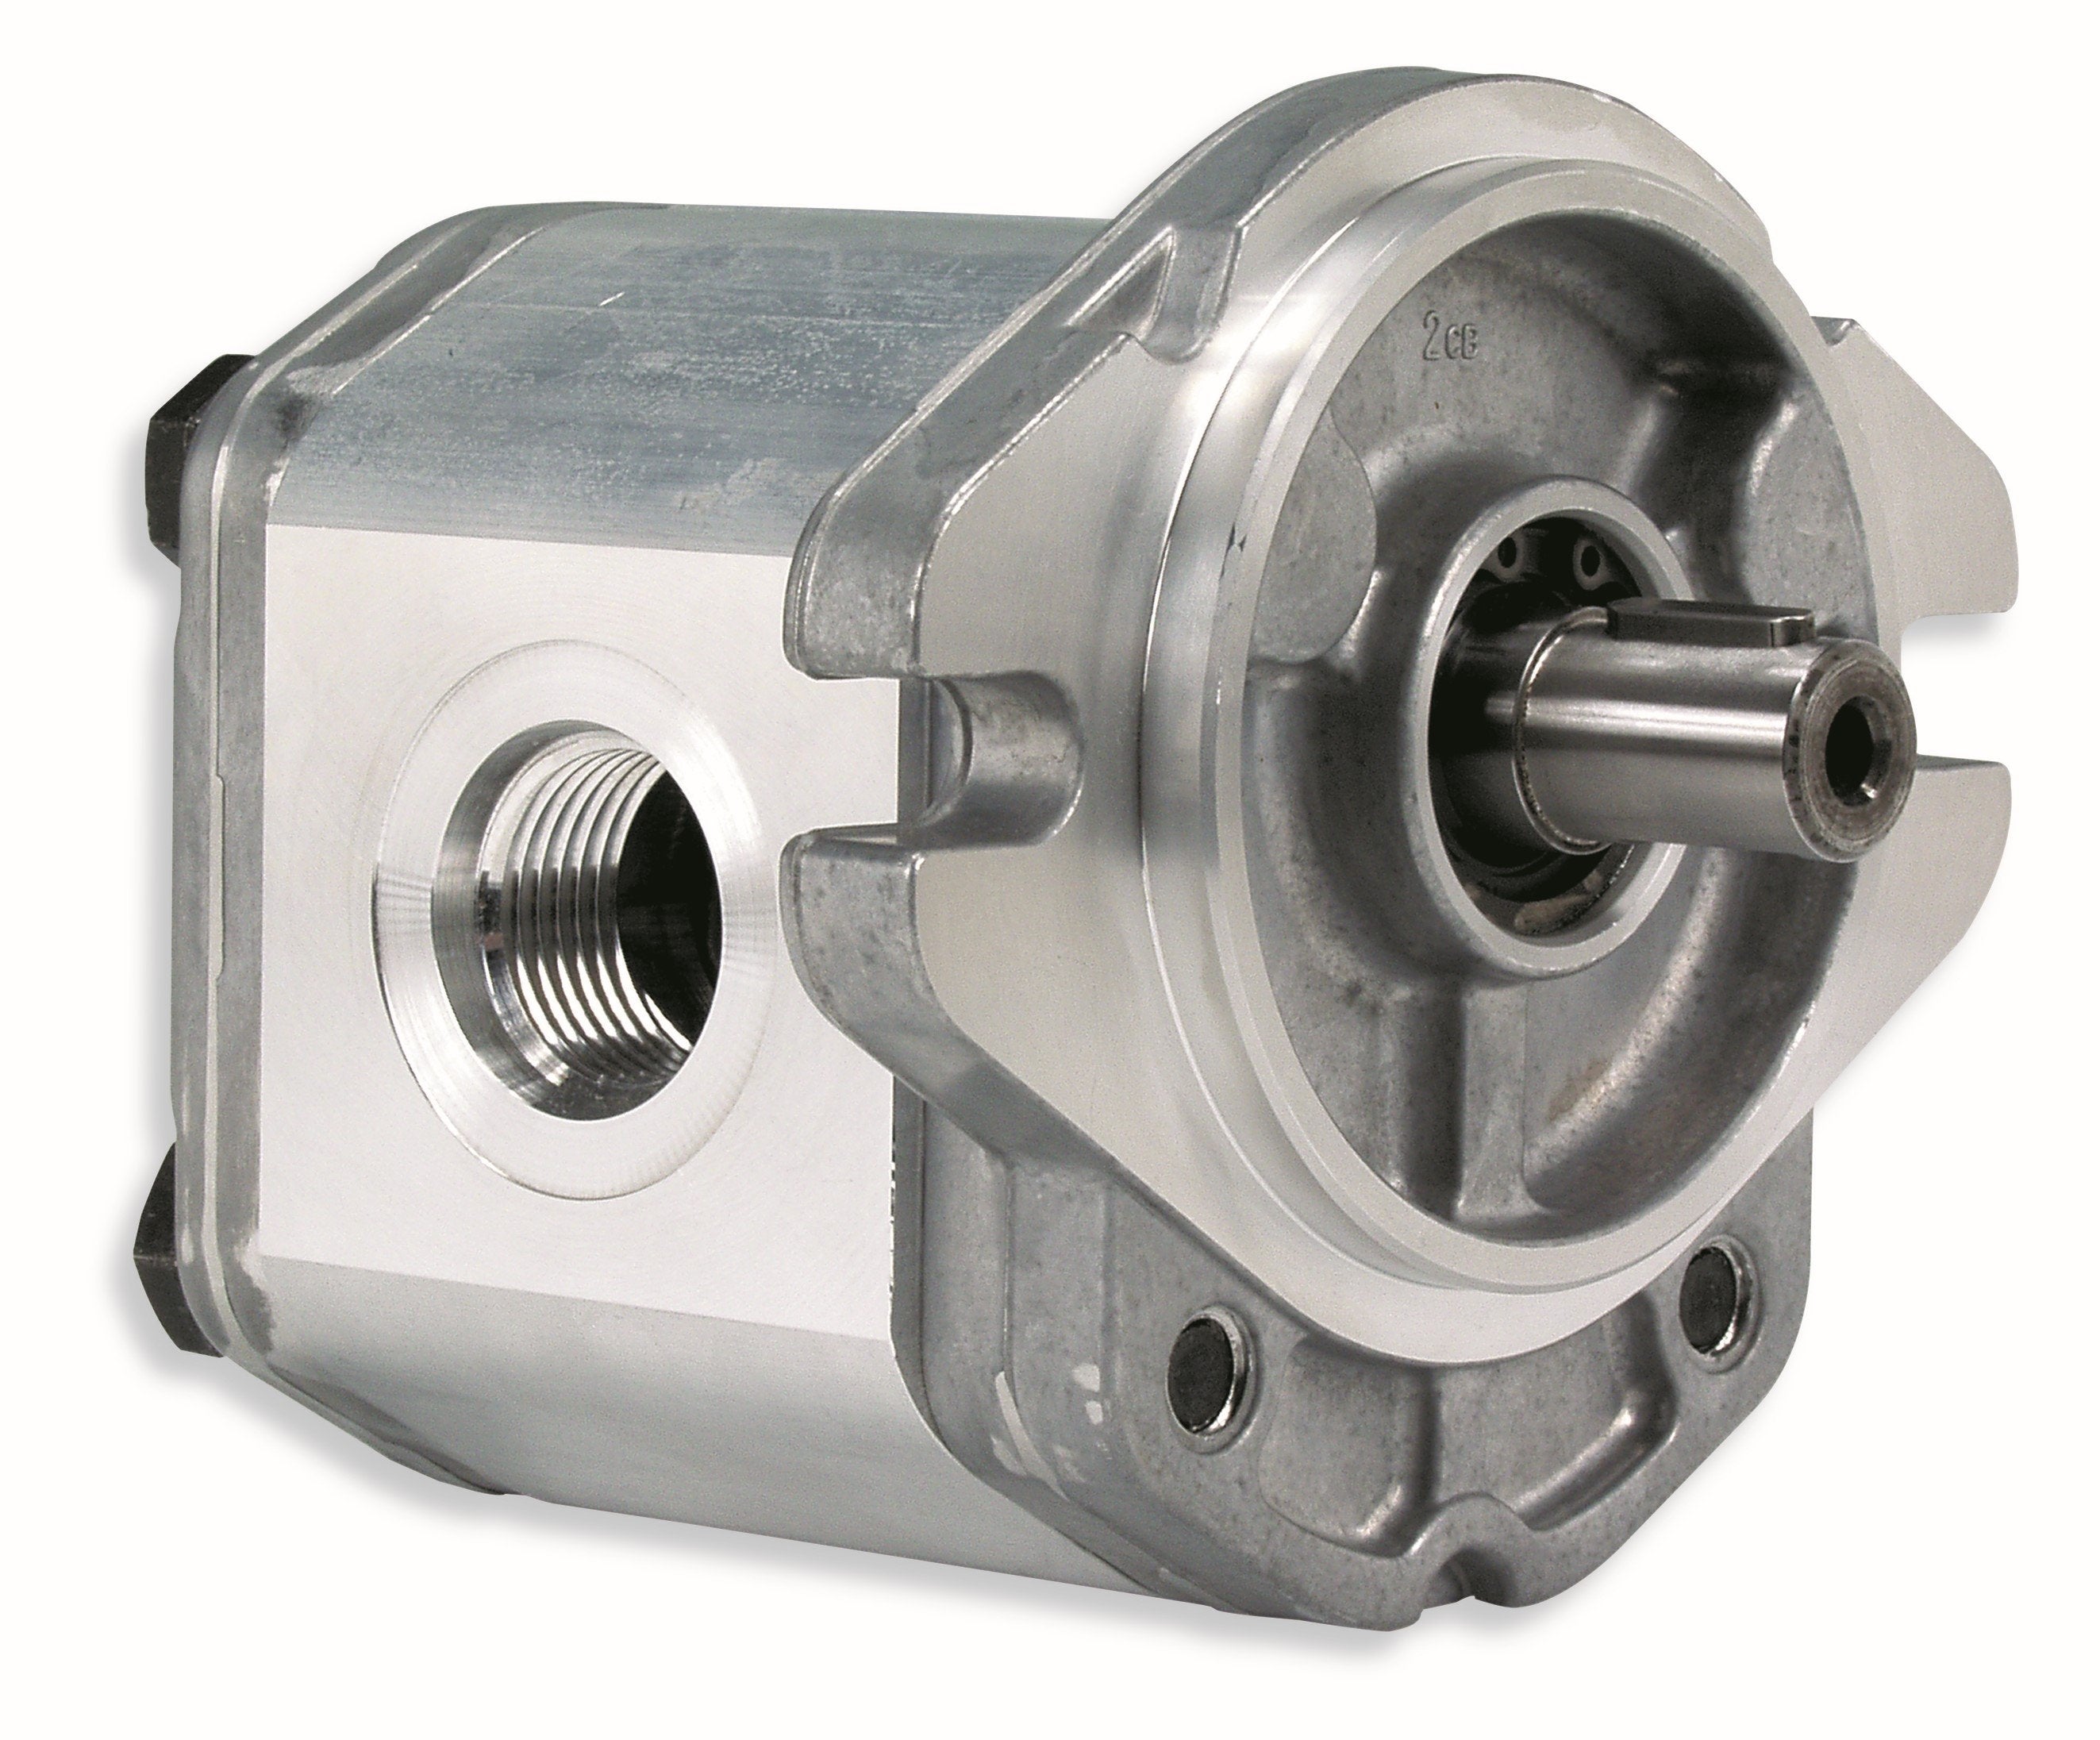 GHM1A-R-7-E2 : Marzocchi Gear Motor, Bidirectional, 5.2cc, 3770psi rated, 3500RPM, 0.5 (1/2") #8 SAE ports, 1/2" Bore x 1/8" Keyed Shaft